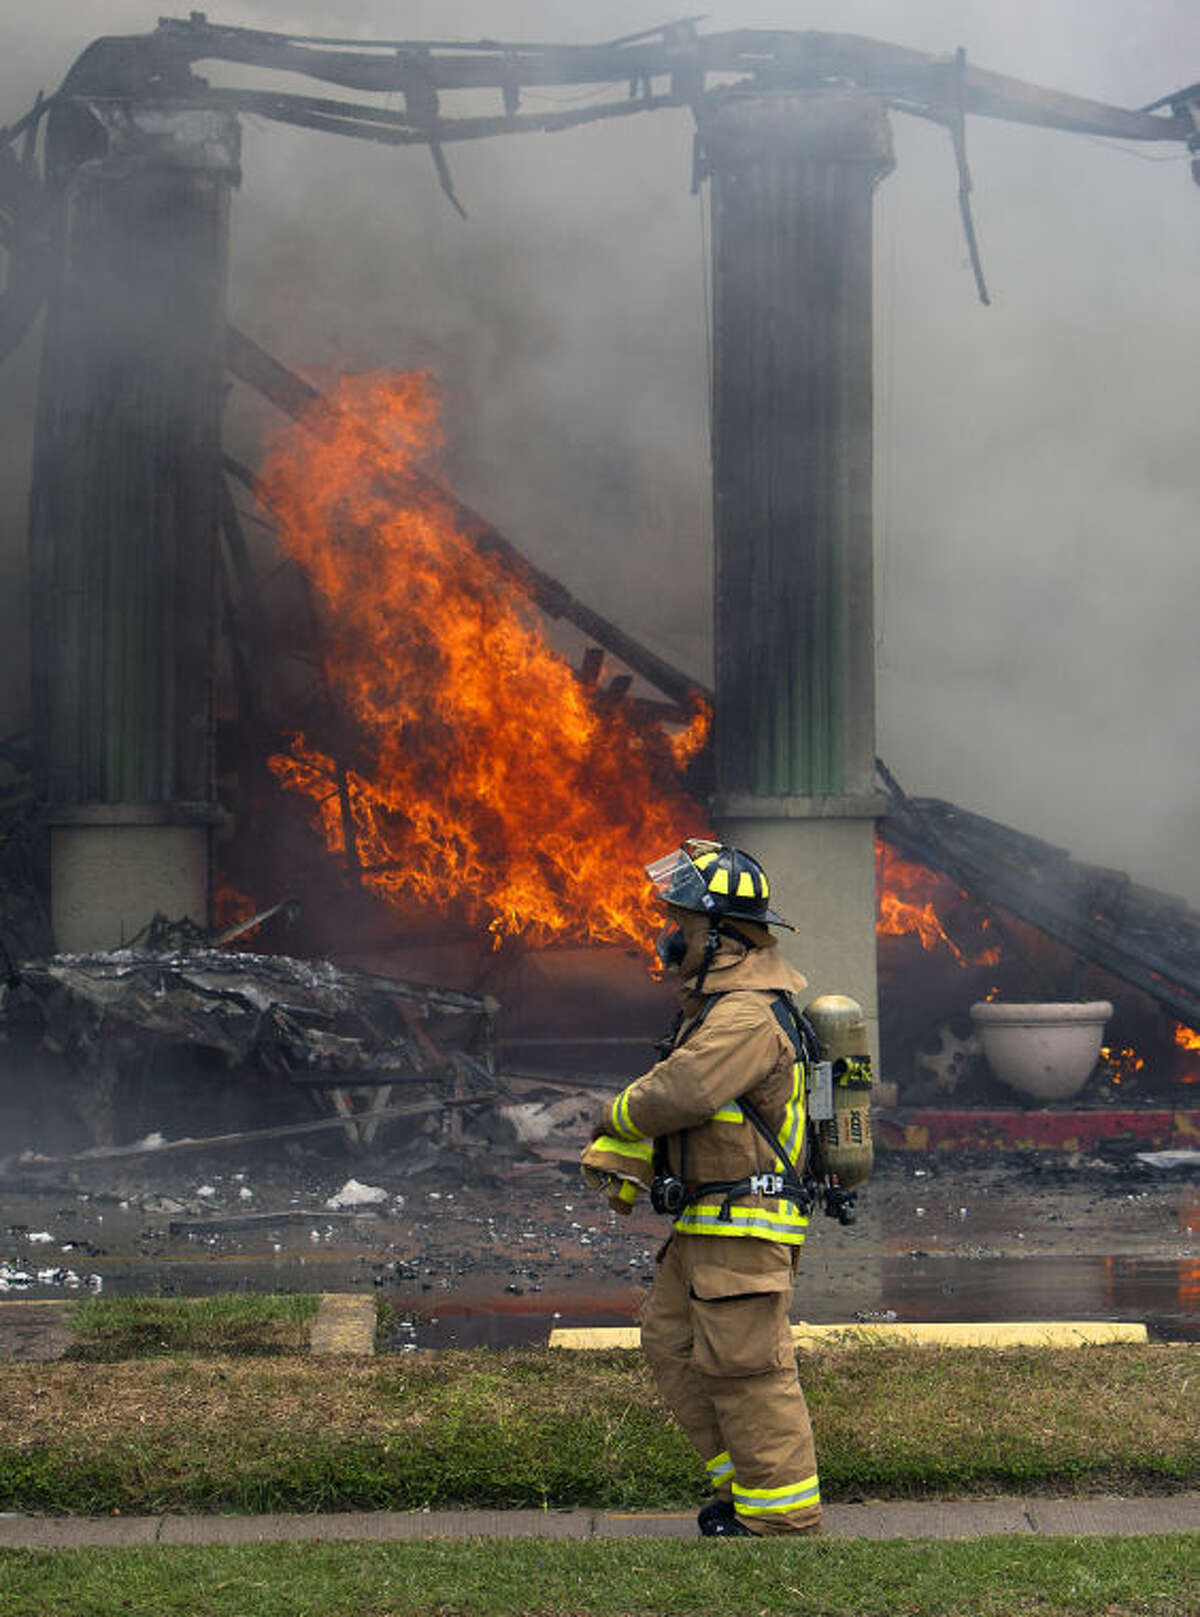 A firefighter stands near a fire at the Southwest Inn, Friday, May 31, 2013, in Houston. A fire that engulfed a Houston motel has injured at least six firefighters, including two critically, and three people are missing. (AP Photo/Houston Chronicle, Cody Duty) MANDATORY CREDIT